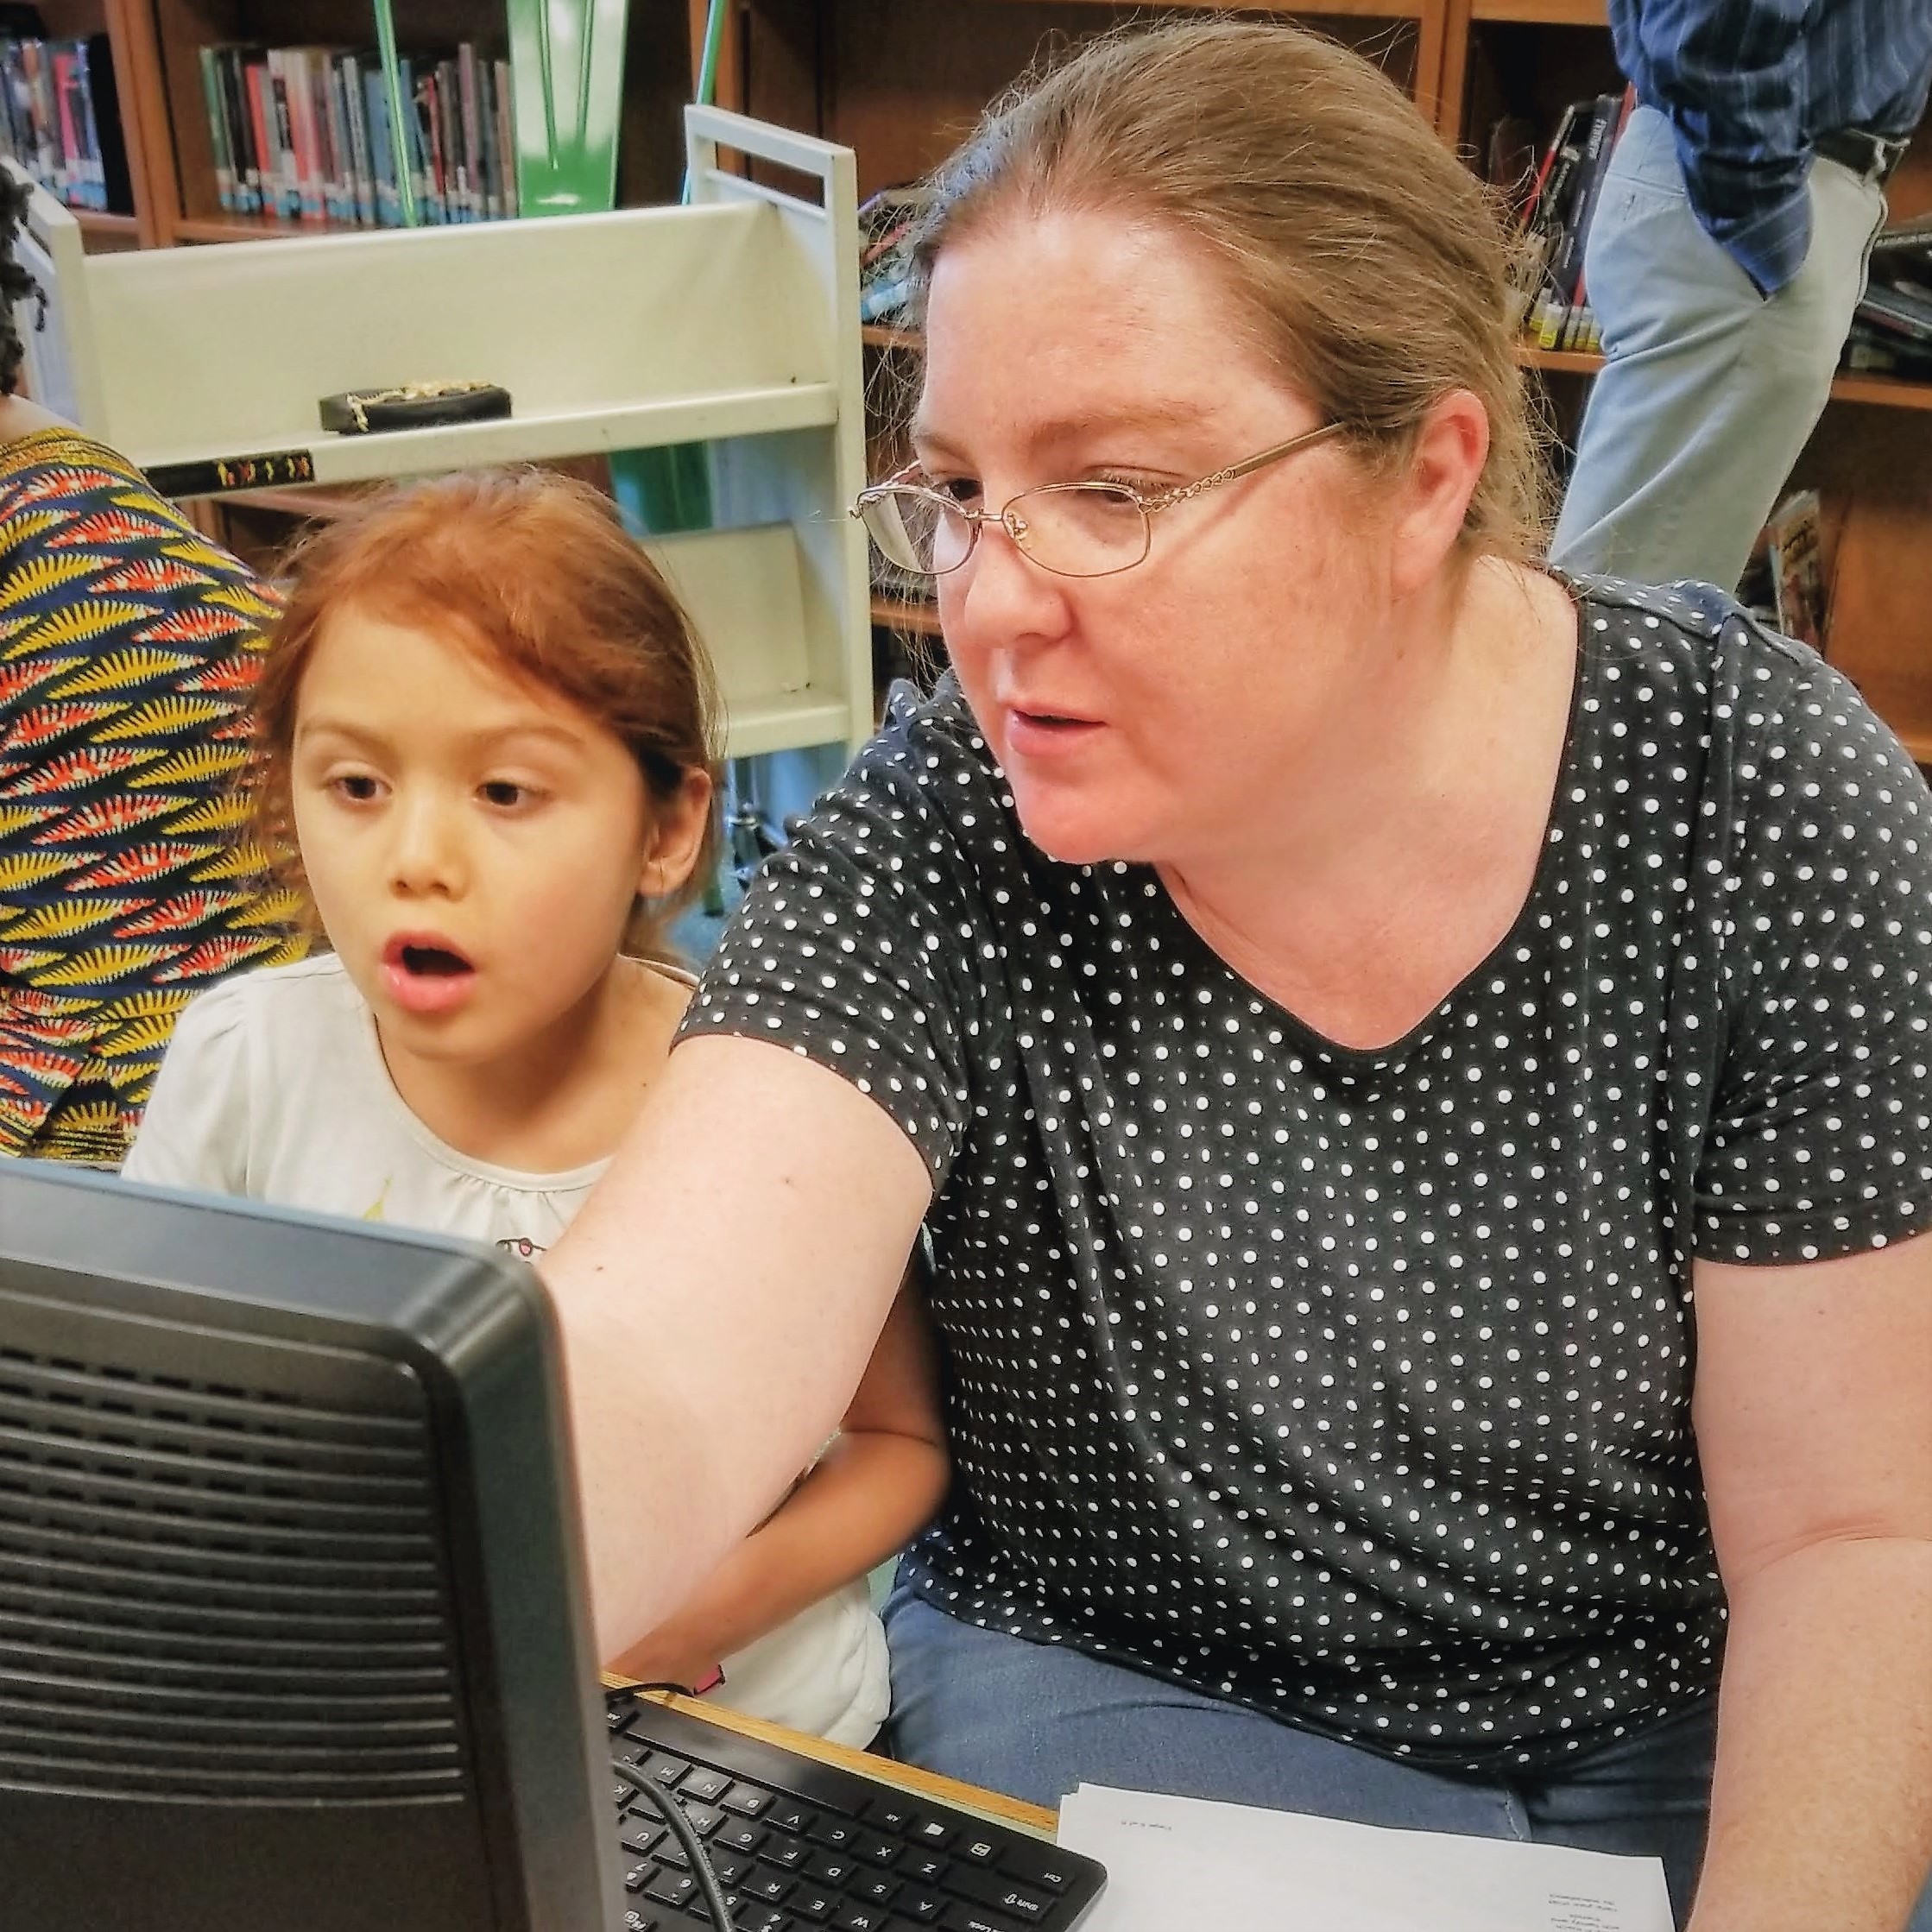 Adult with glasses and child looking a computer together